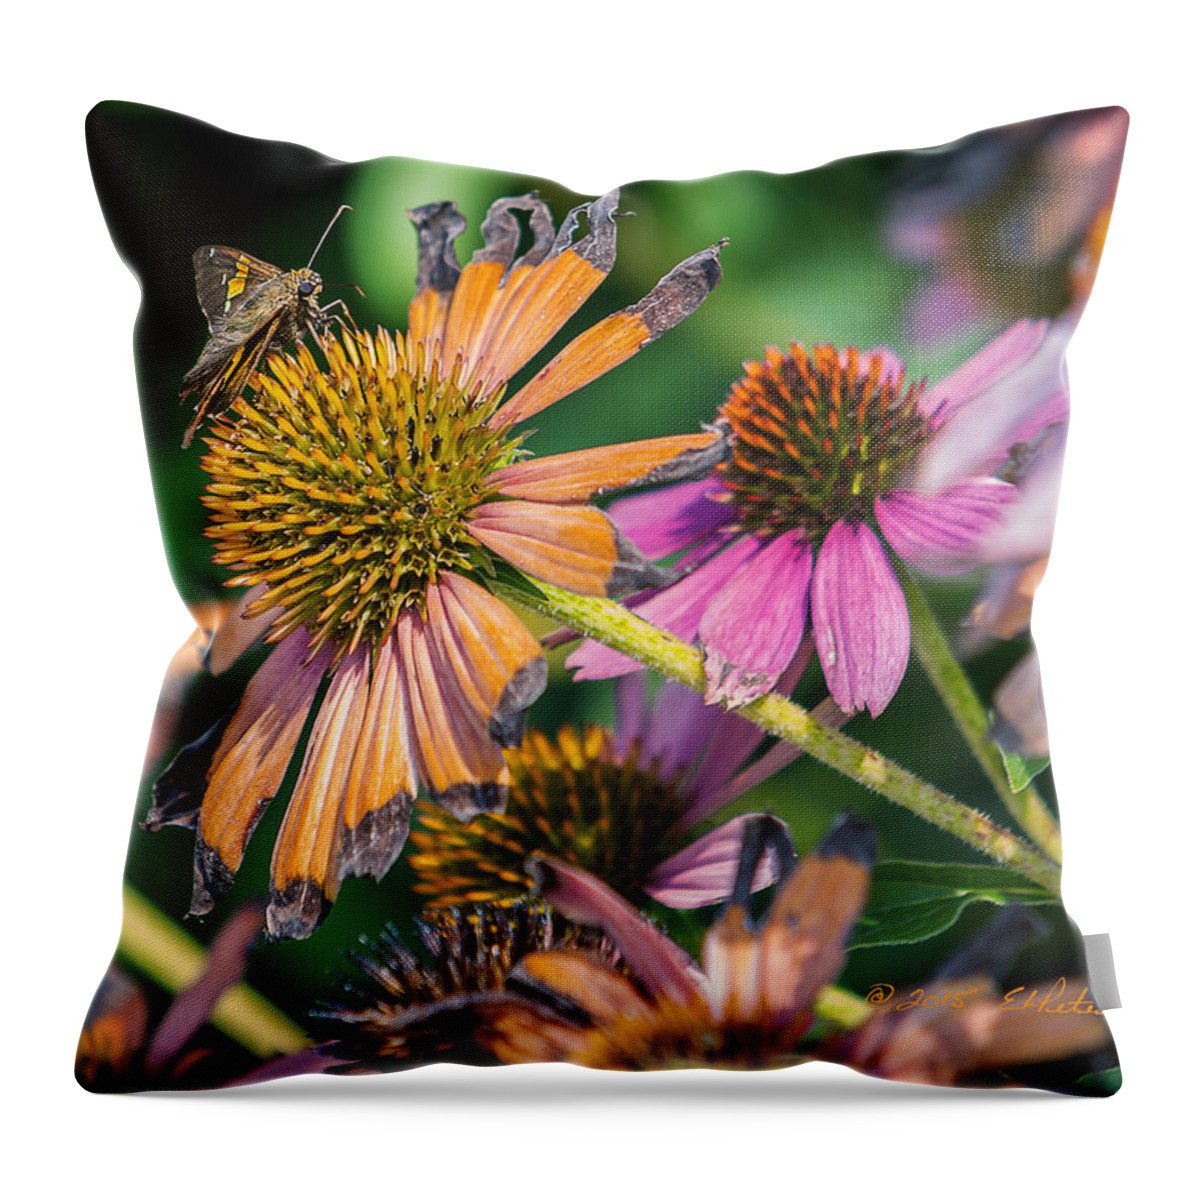 Flowers Throw Pillow featuring the photograph Season Ending by Ed Peterson